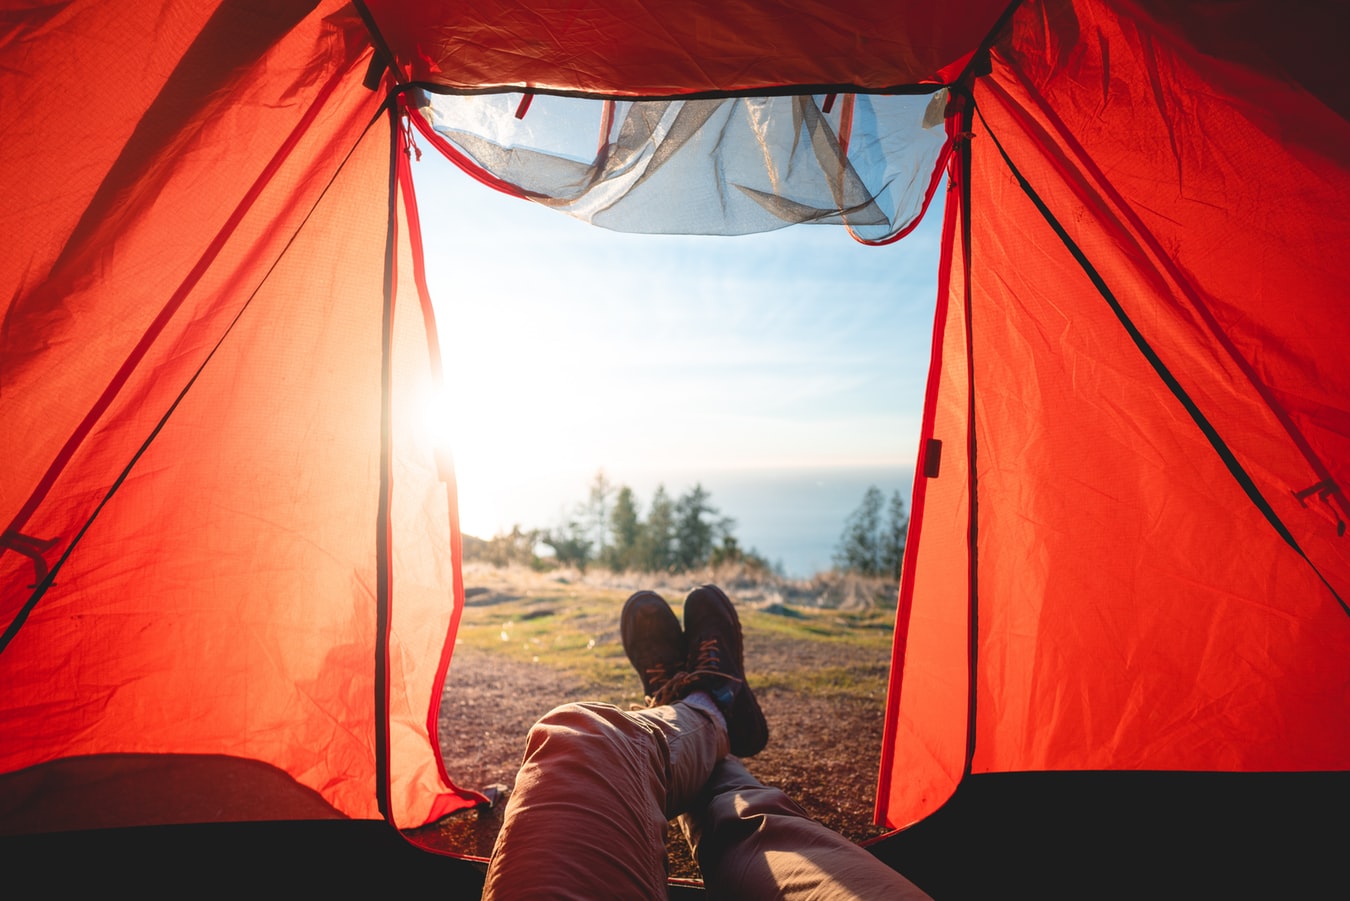 TIPS FOR MAKING A COMFORTABLE CAMPSITE